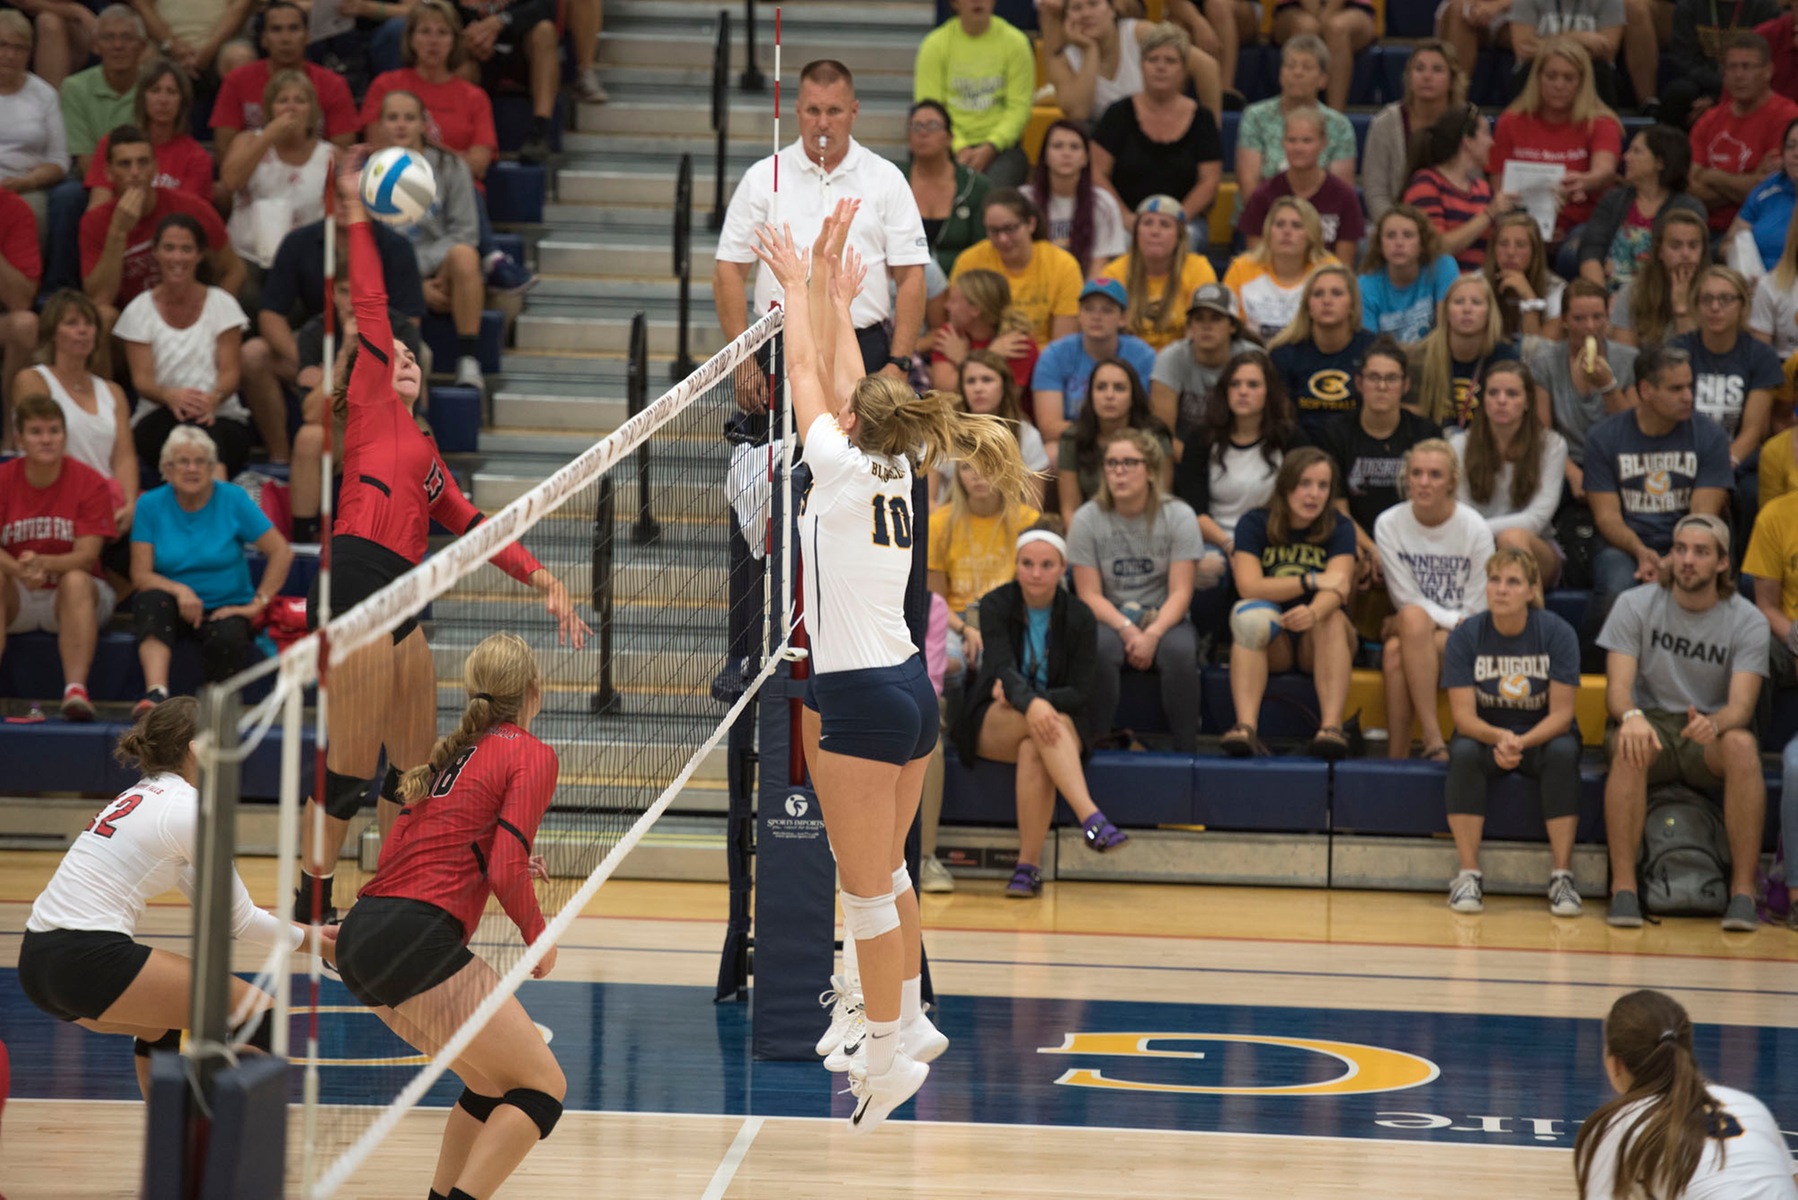 Blugolds sweep Cobbers & Eagles to close out Schumacher Memorial Tournament